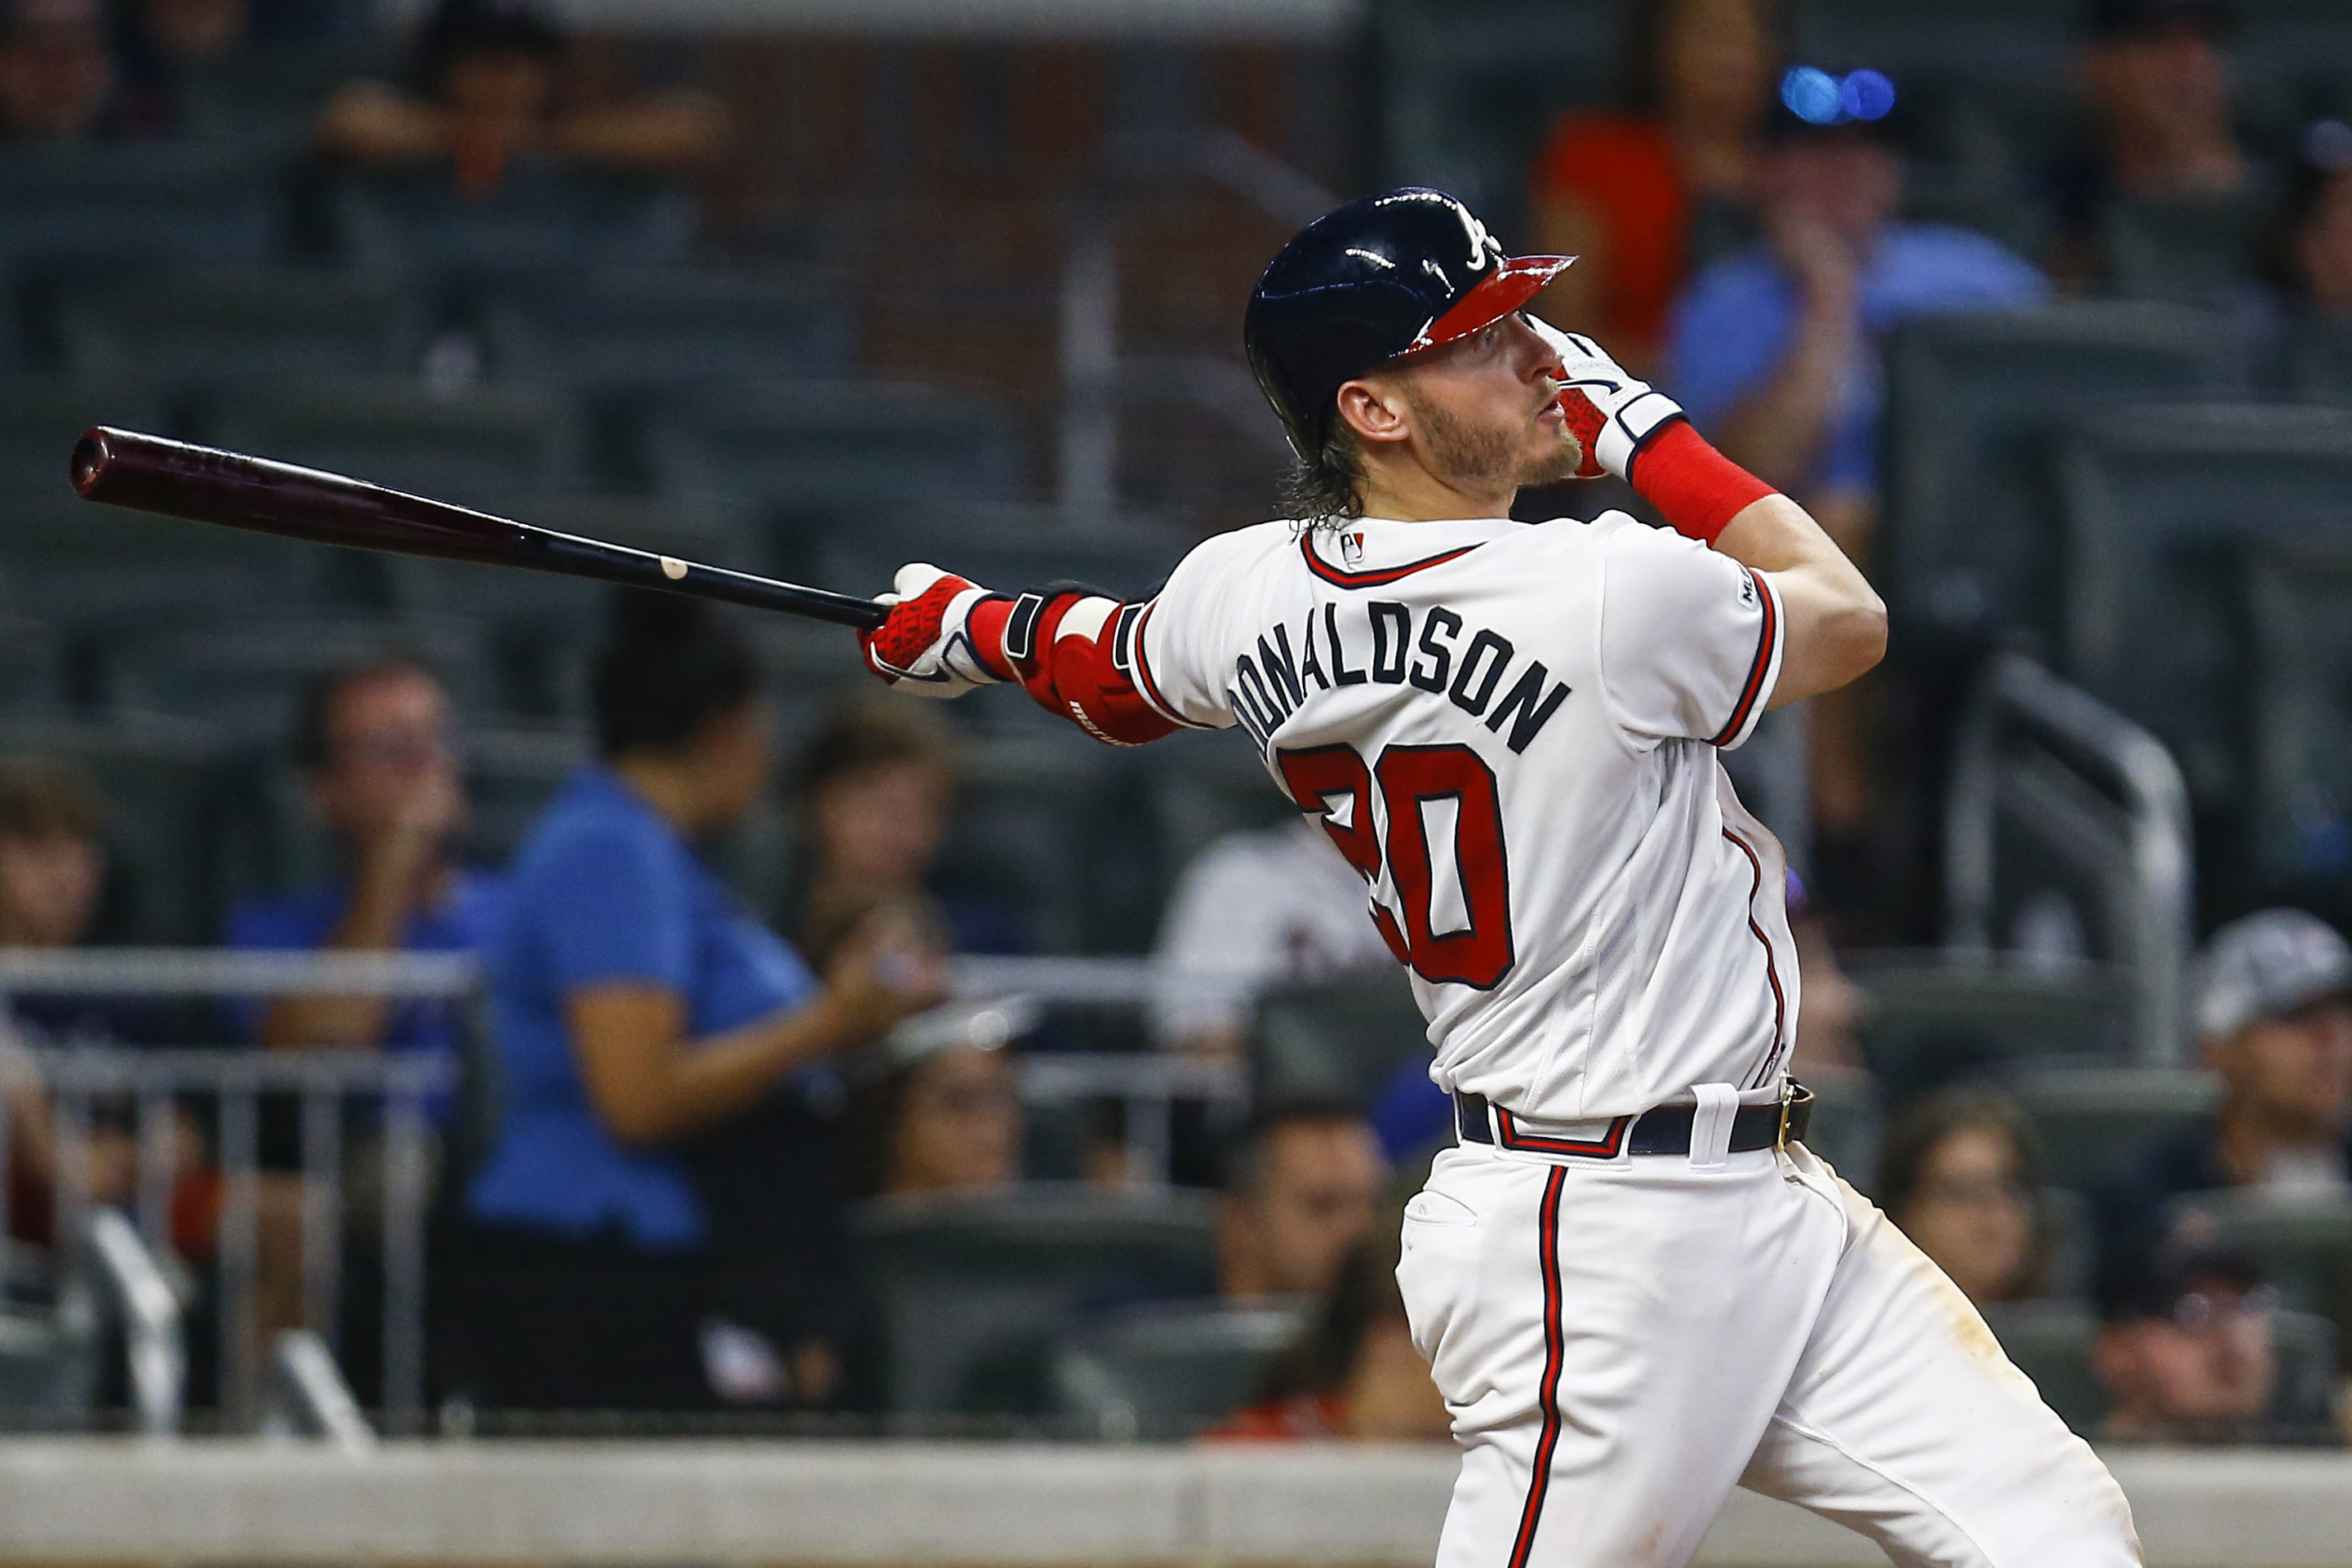 Report: Braves have four years on the table for Josh Donaldson